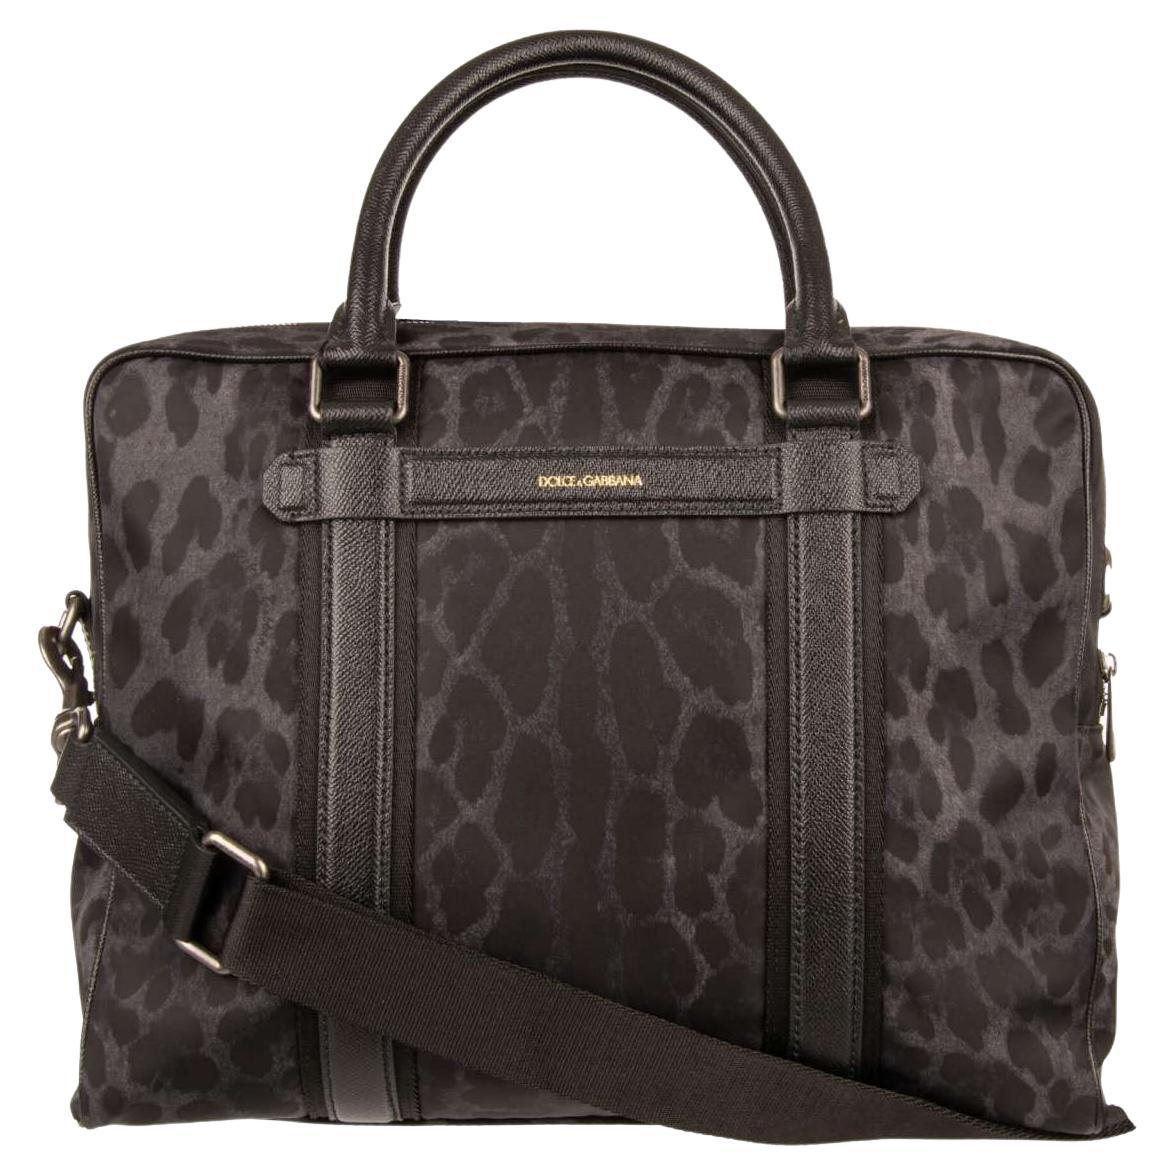 D&G Leopard Printed Nylon Briefcase Bag with Logo and Pockets Black Gray For Sale